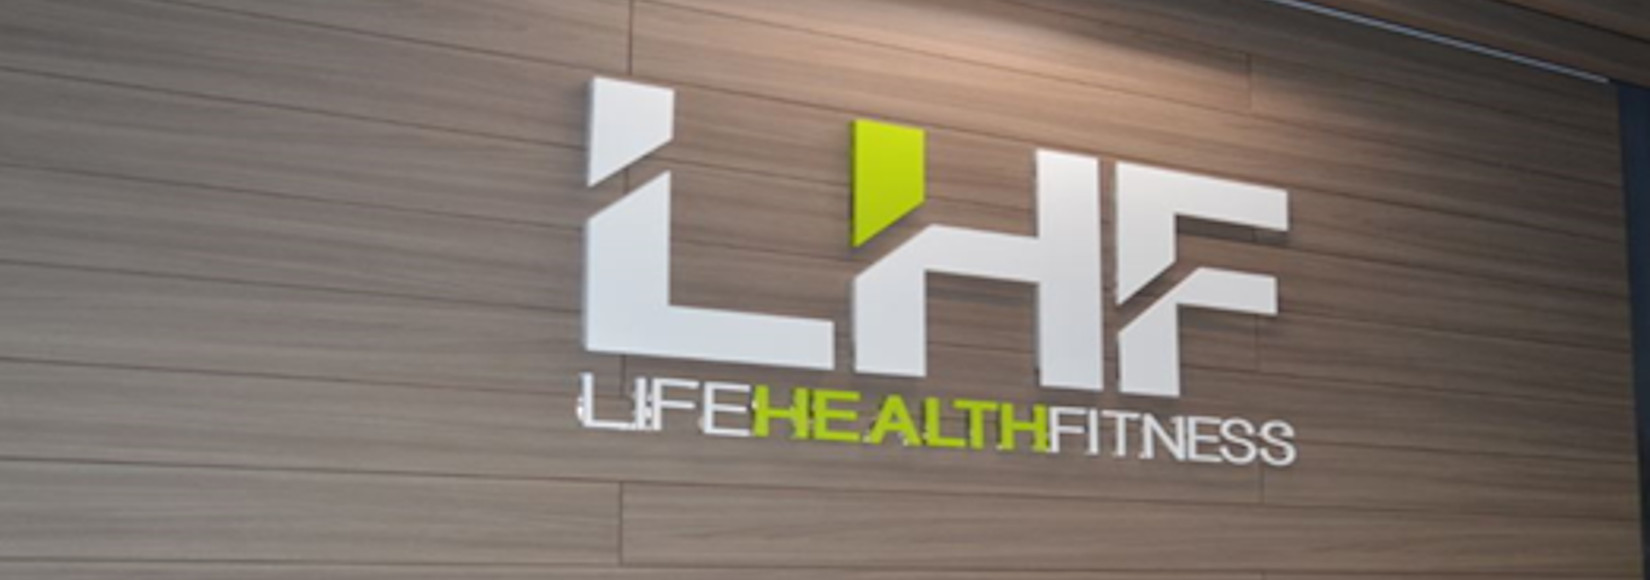 Life Health Fitness wall-mounted sign